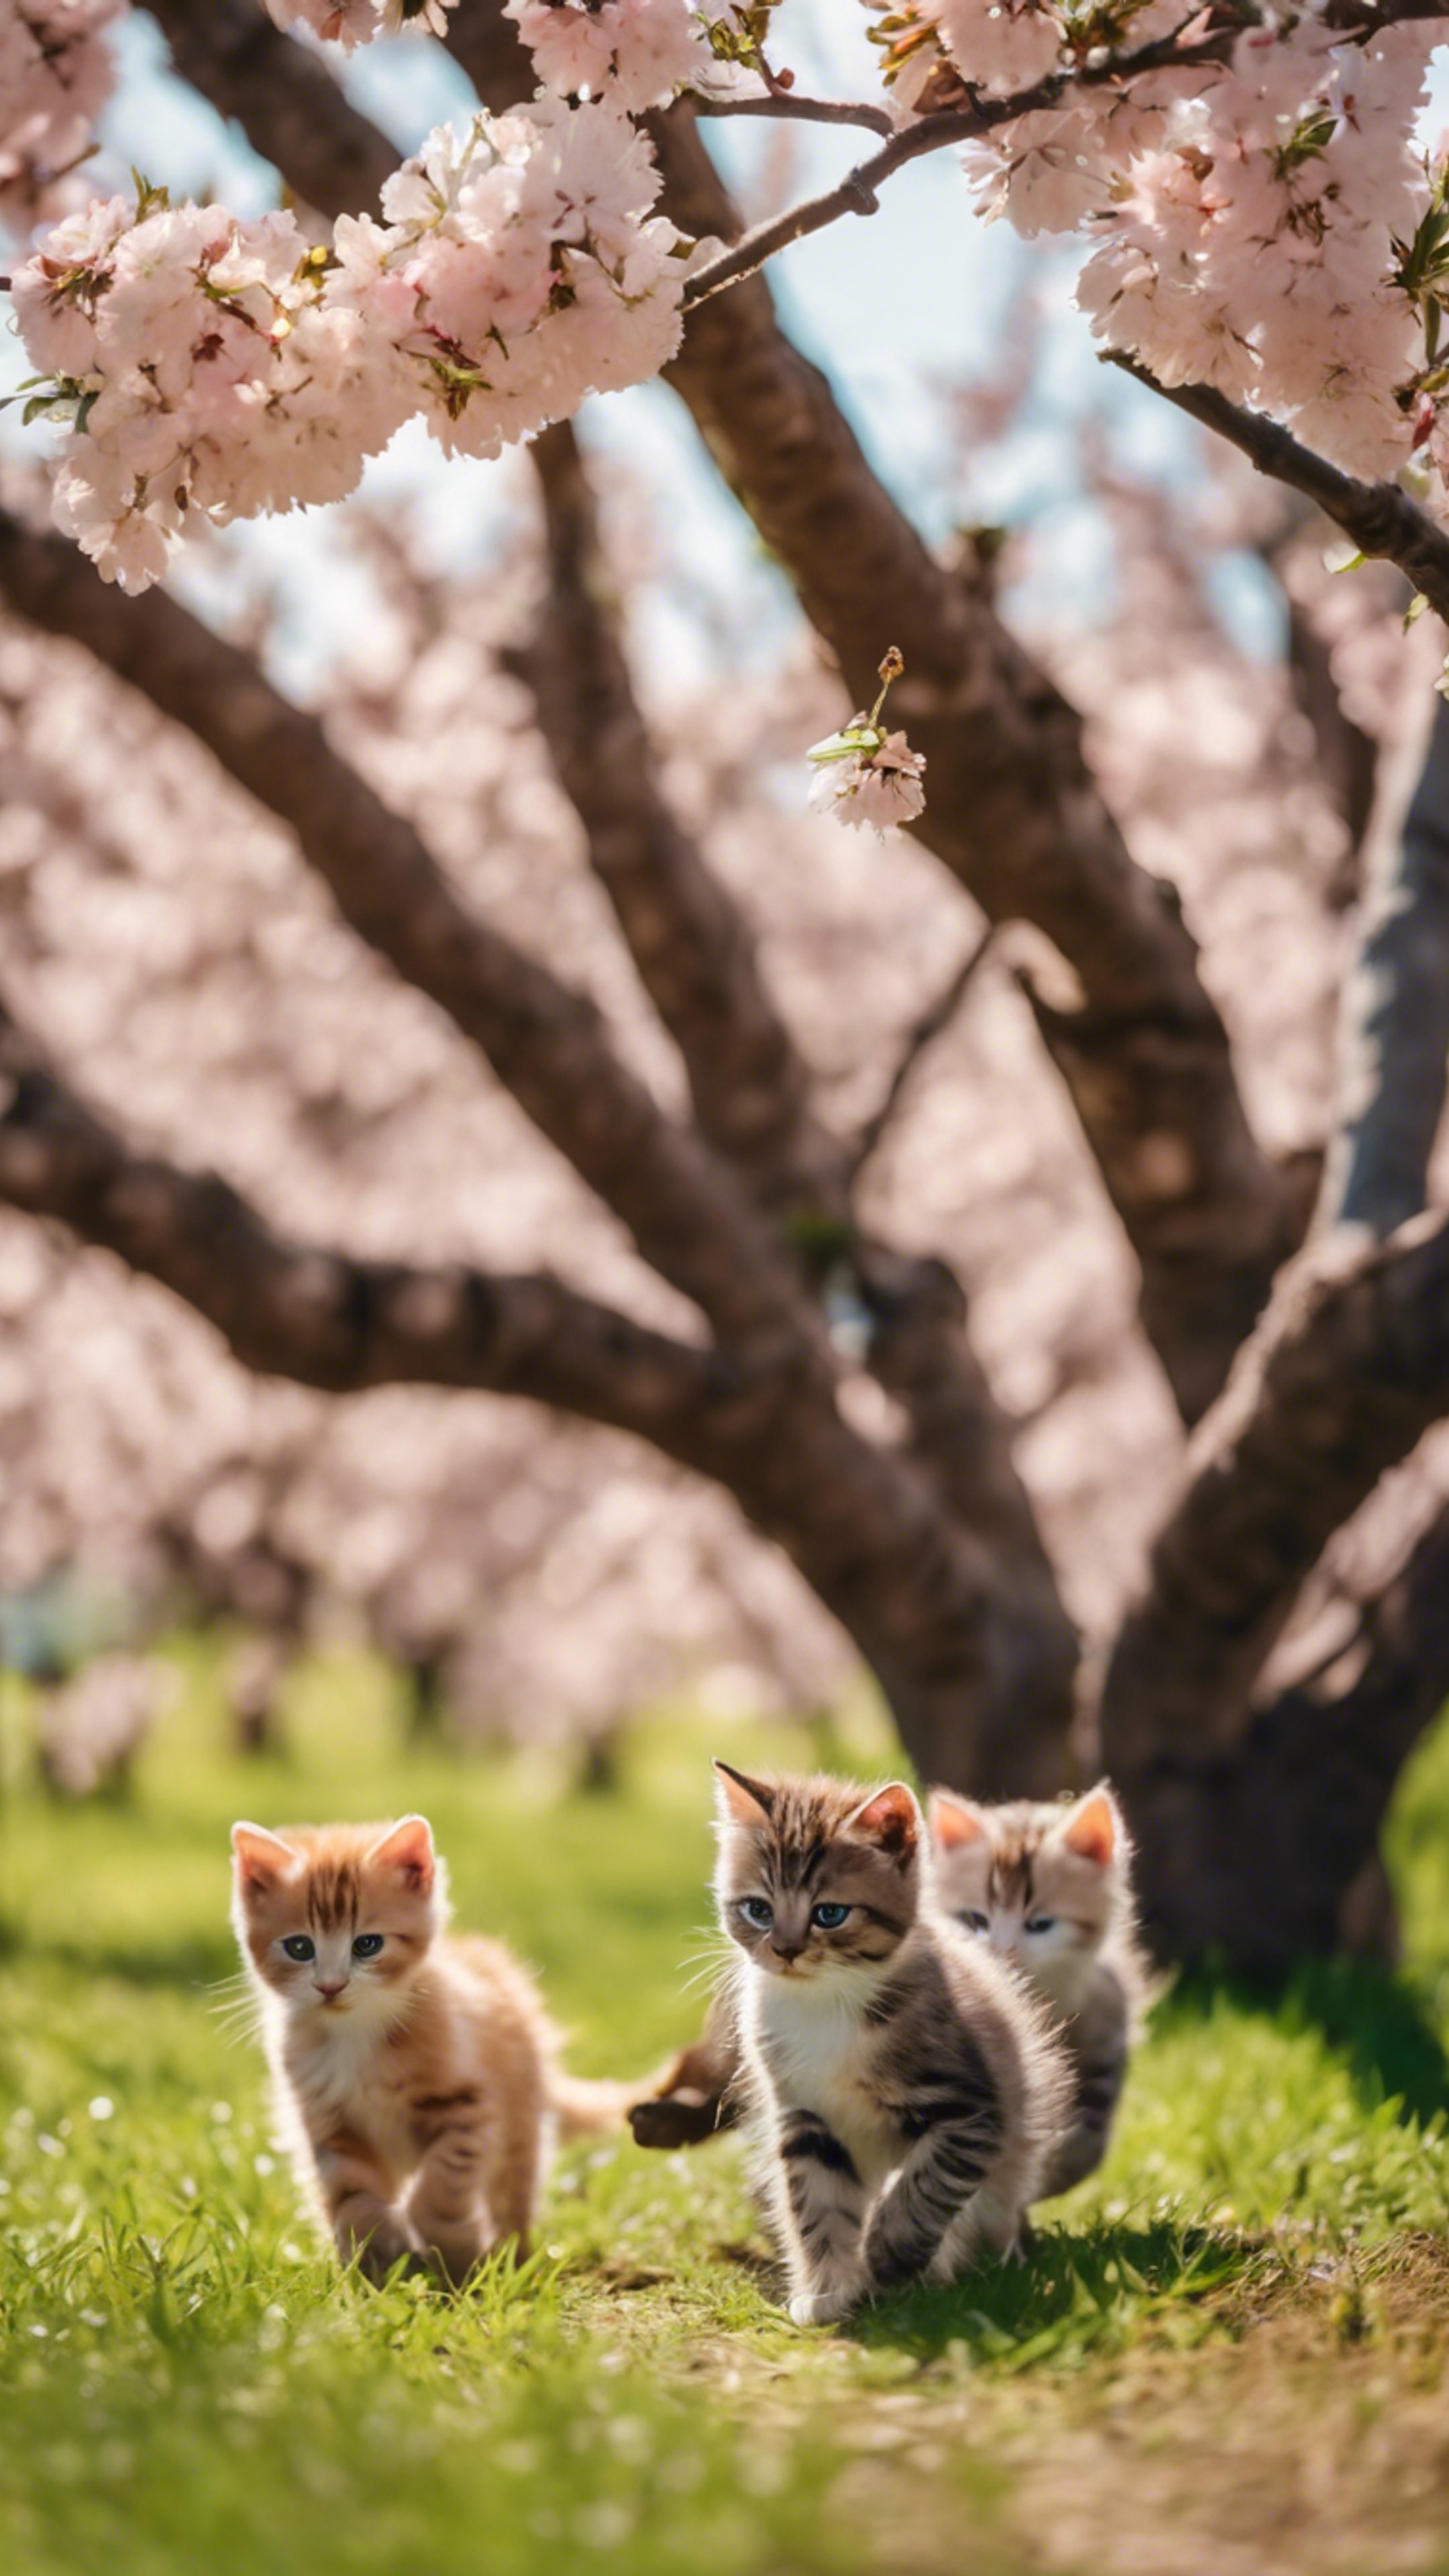 A group of multi-colored kittens chasing their shadows under a peach tree during a beautiful spring afternoon. วอลล์เปเปอร์[1b8583aedfab46758668]